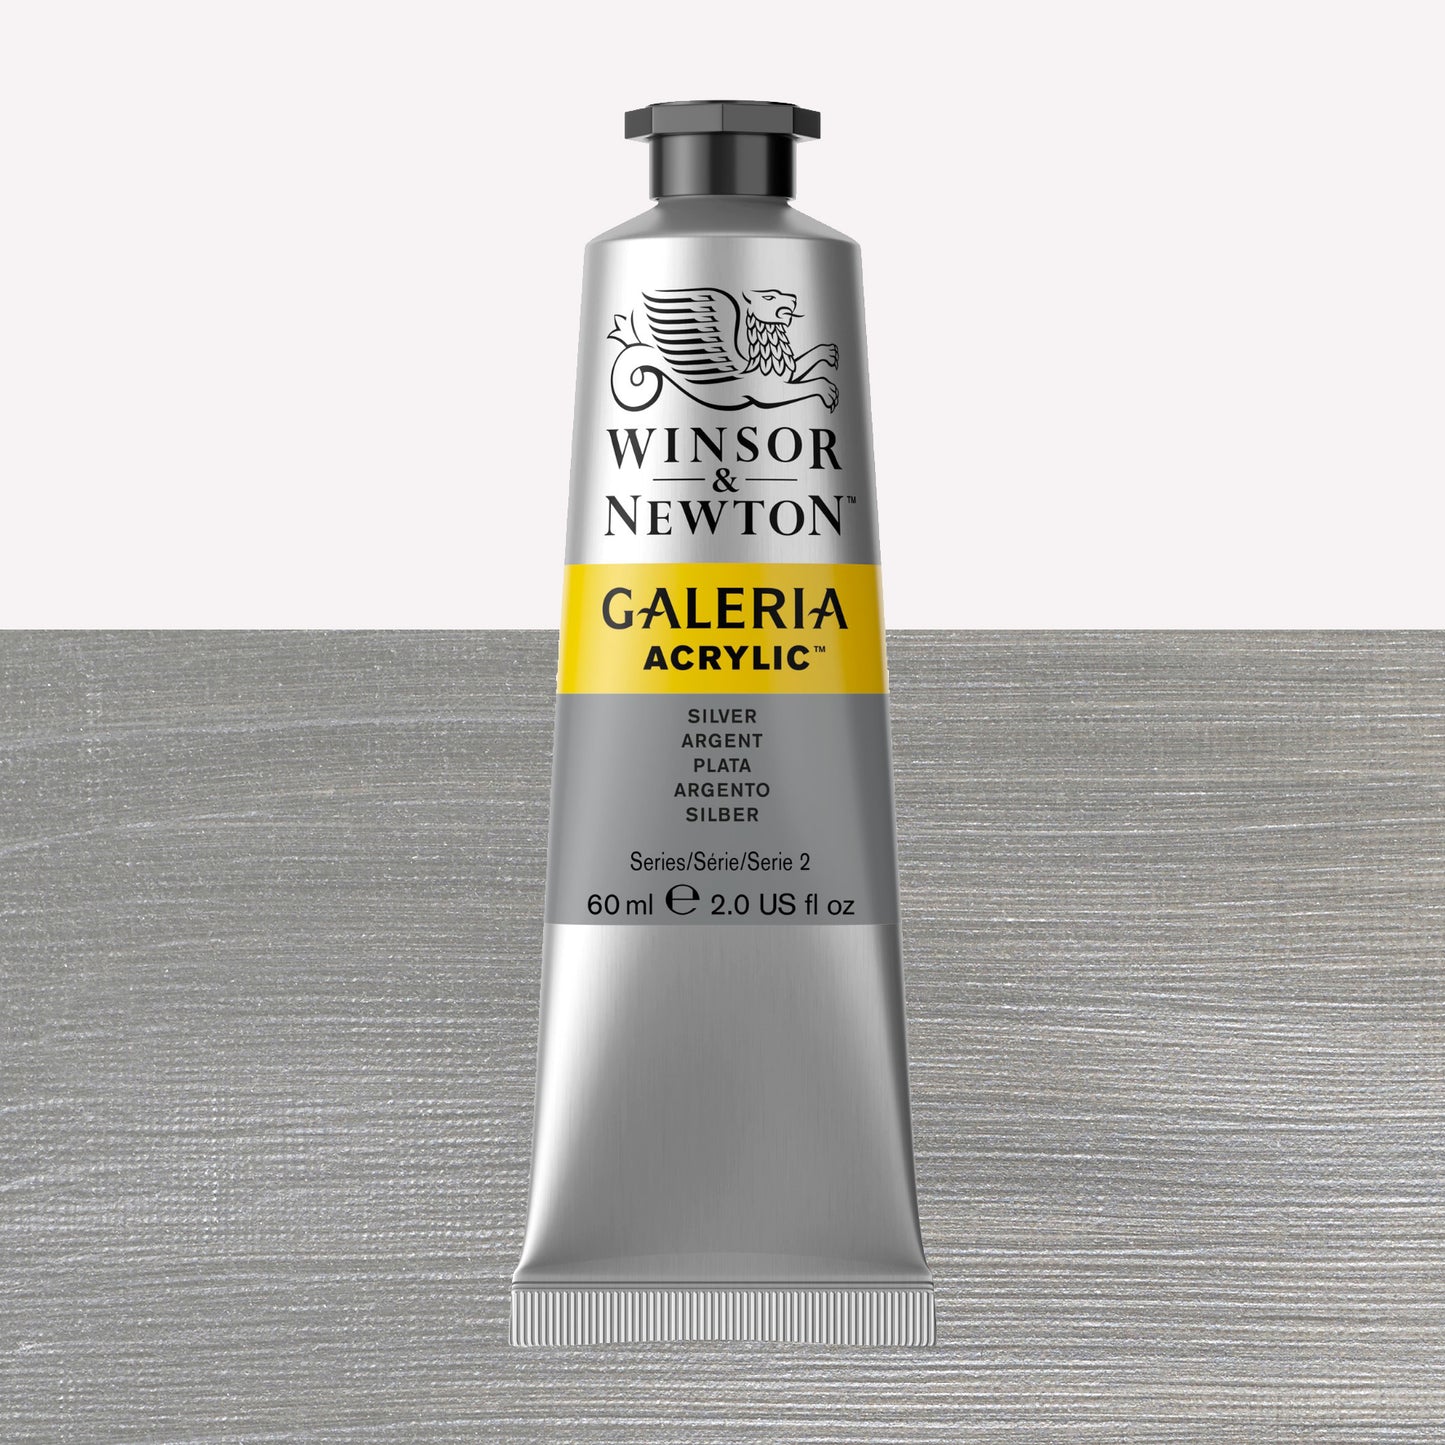 A 60ml tube of vibrant Galeria Acrylic paint in the shade Silver. This professional-quality paint is packaged in a silver tube with a black lid. Made by Winsor and Newton.